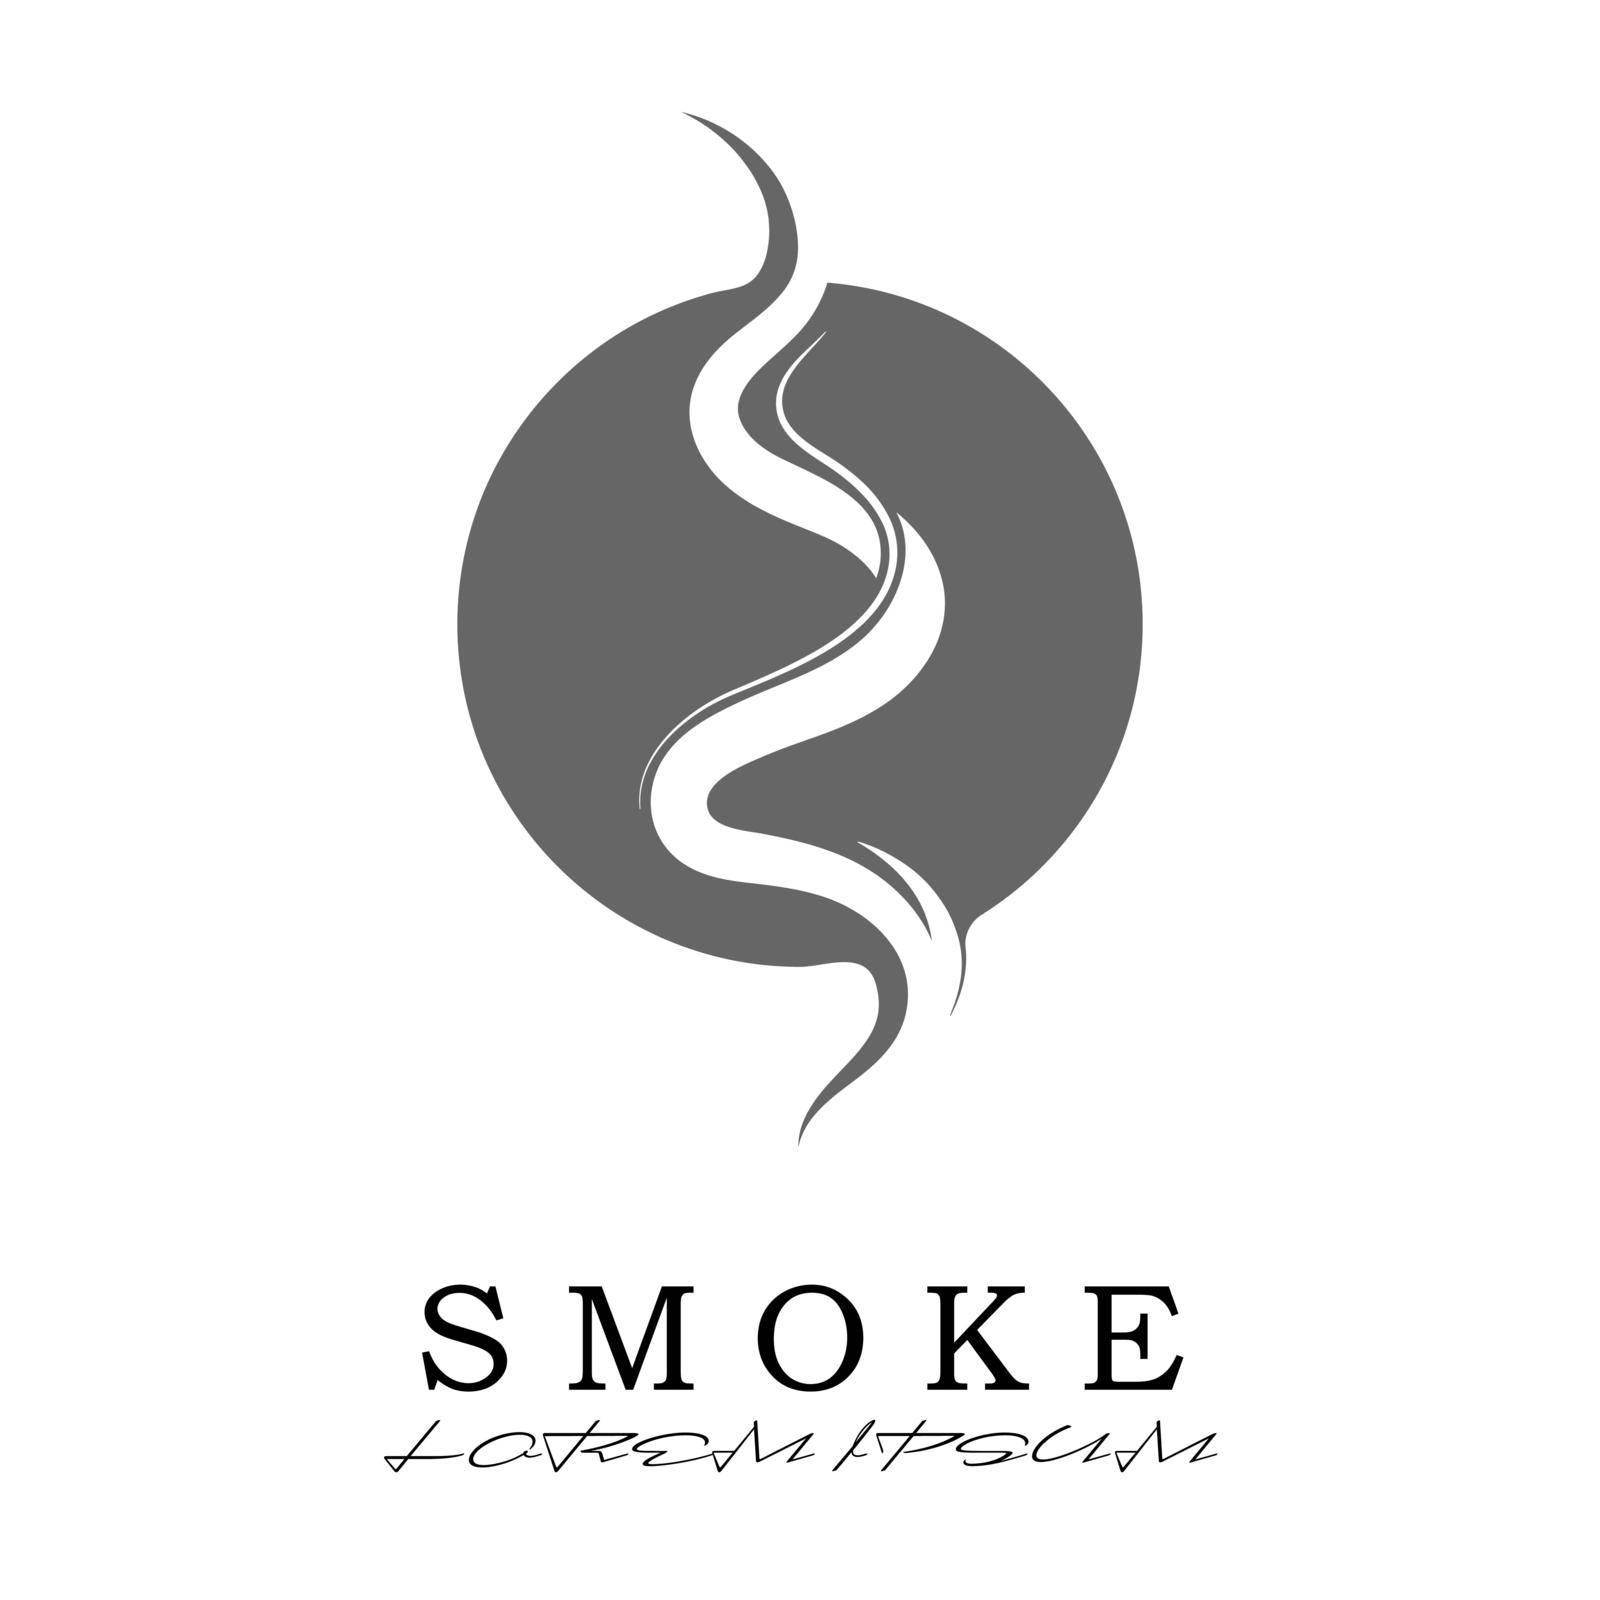 Vector icon of smoke, incense, or steam. Flat style, isolated on a white background.